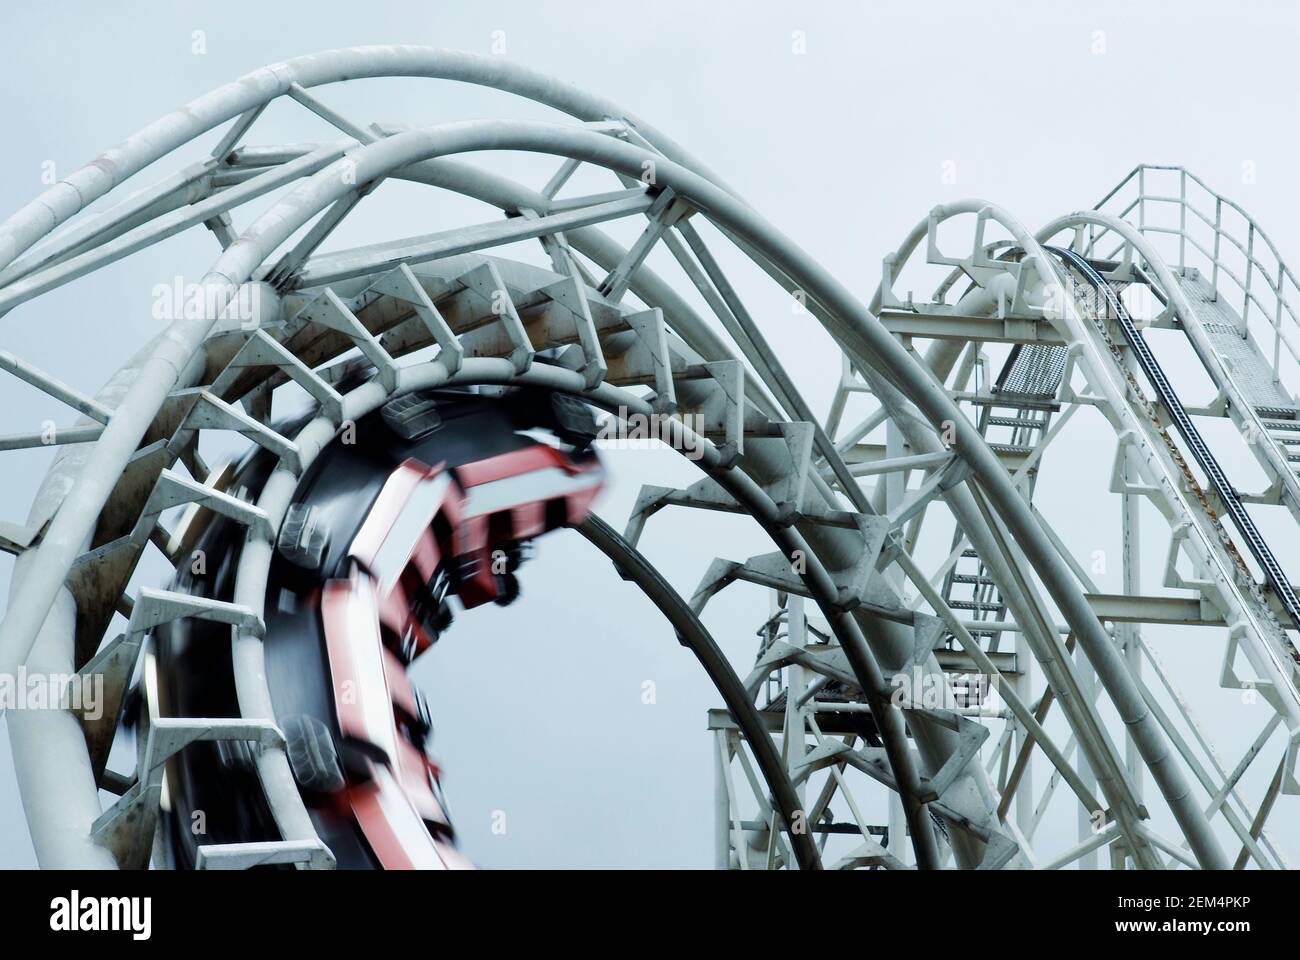 Low angle view of a rollercoaster in motion Stock Photo